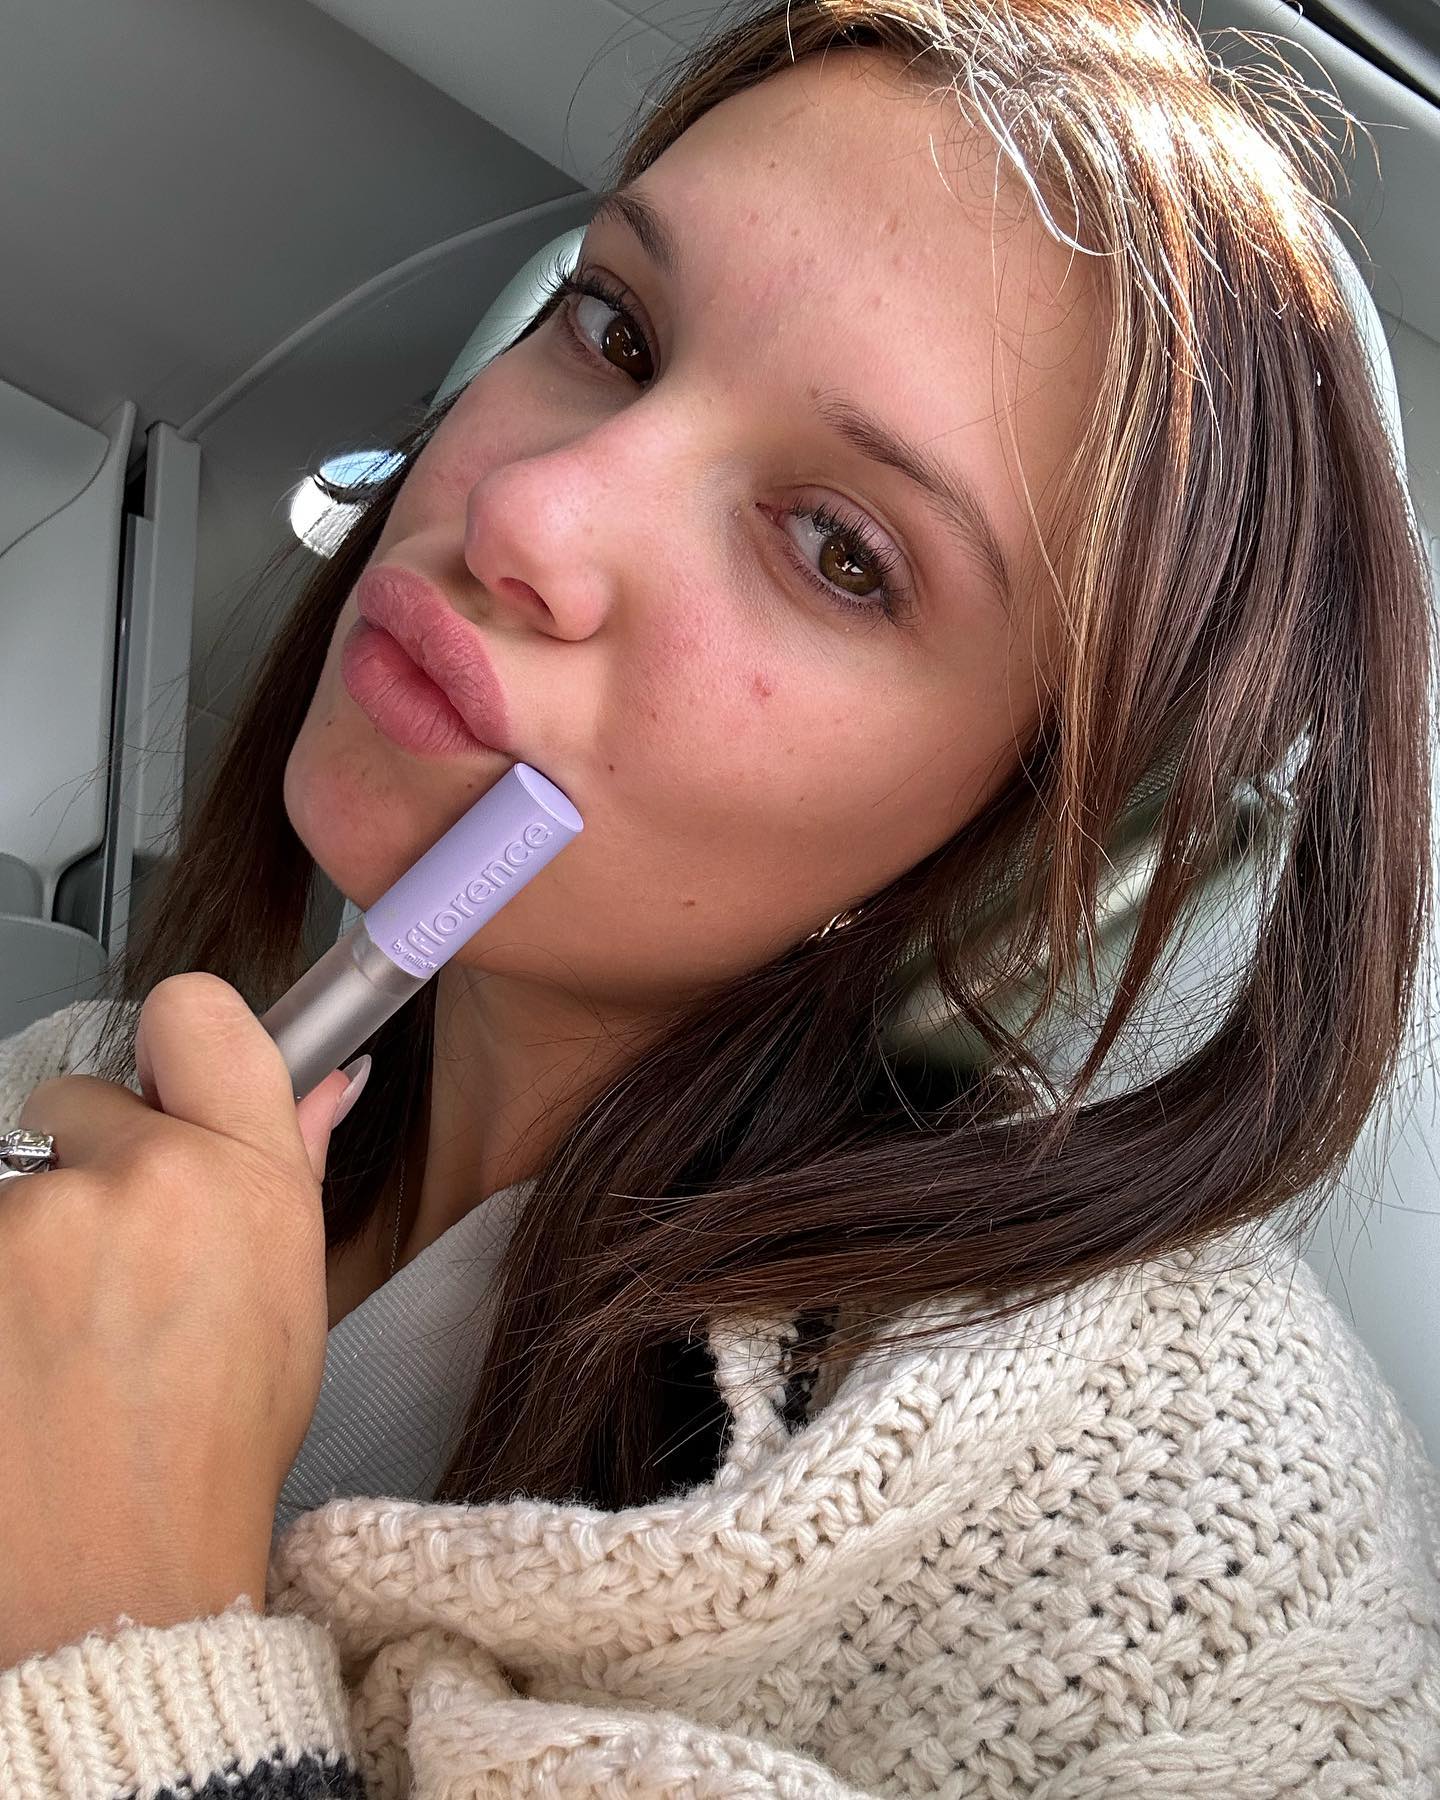 General photo of Millie Bobby Brown